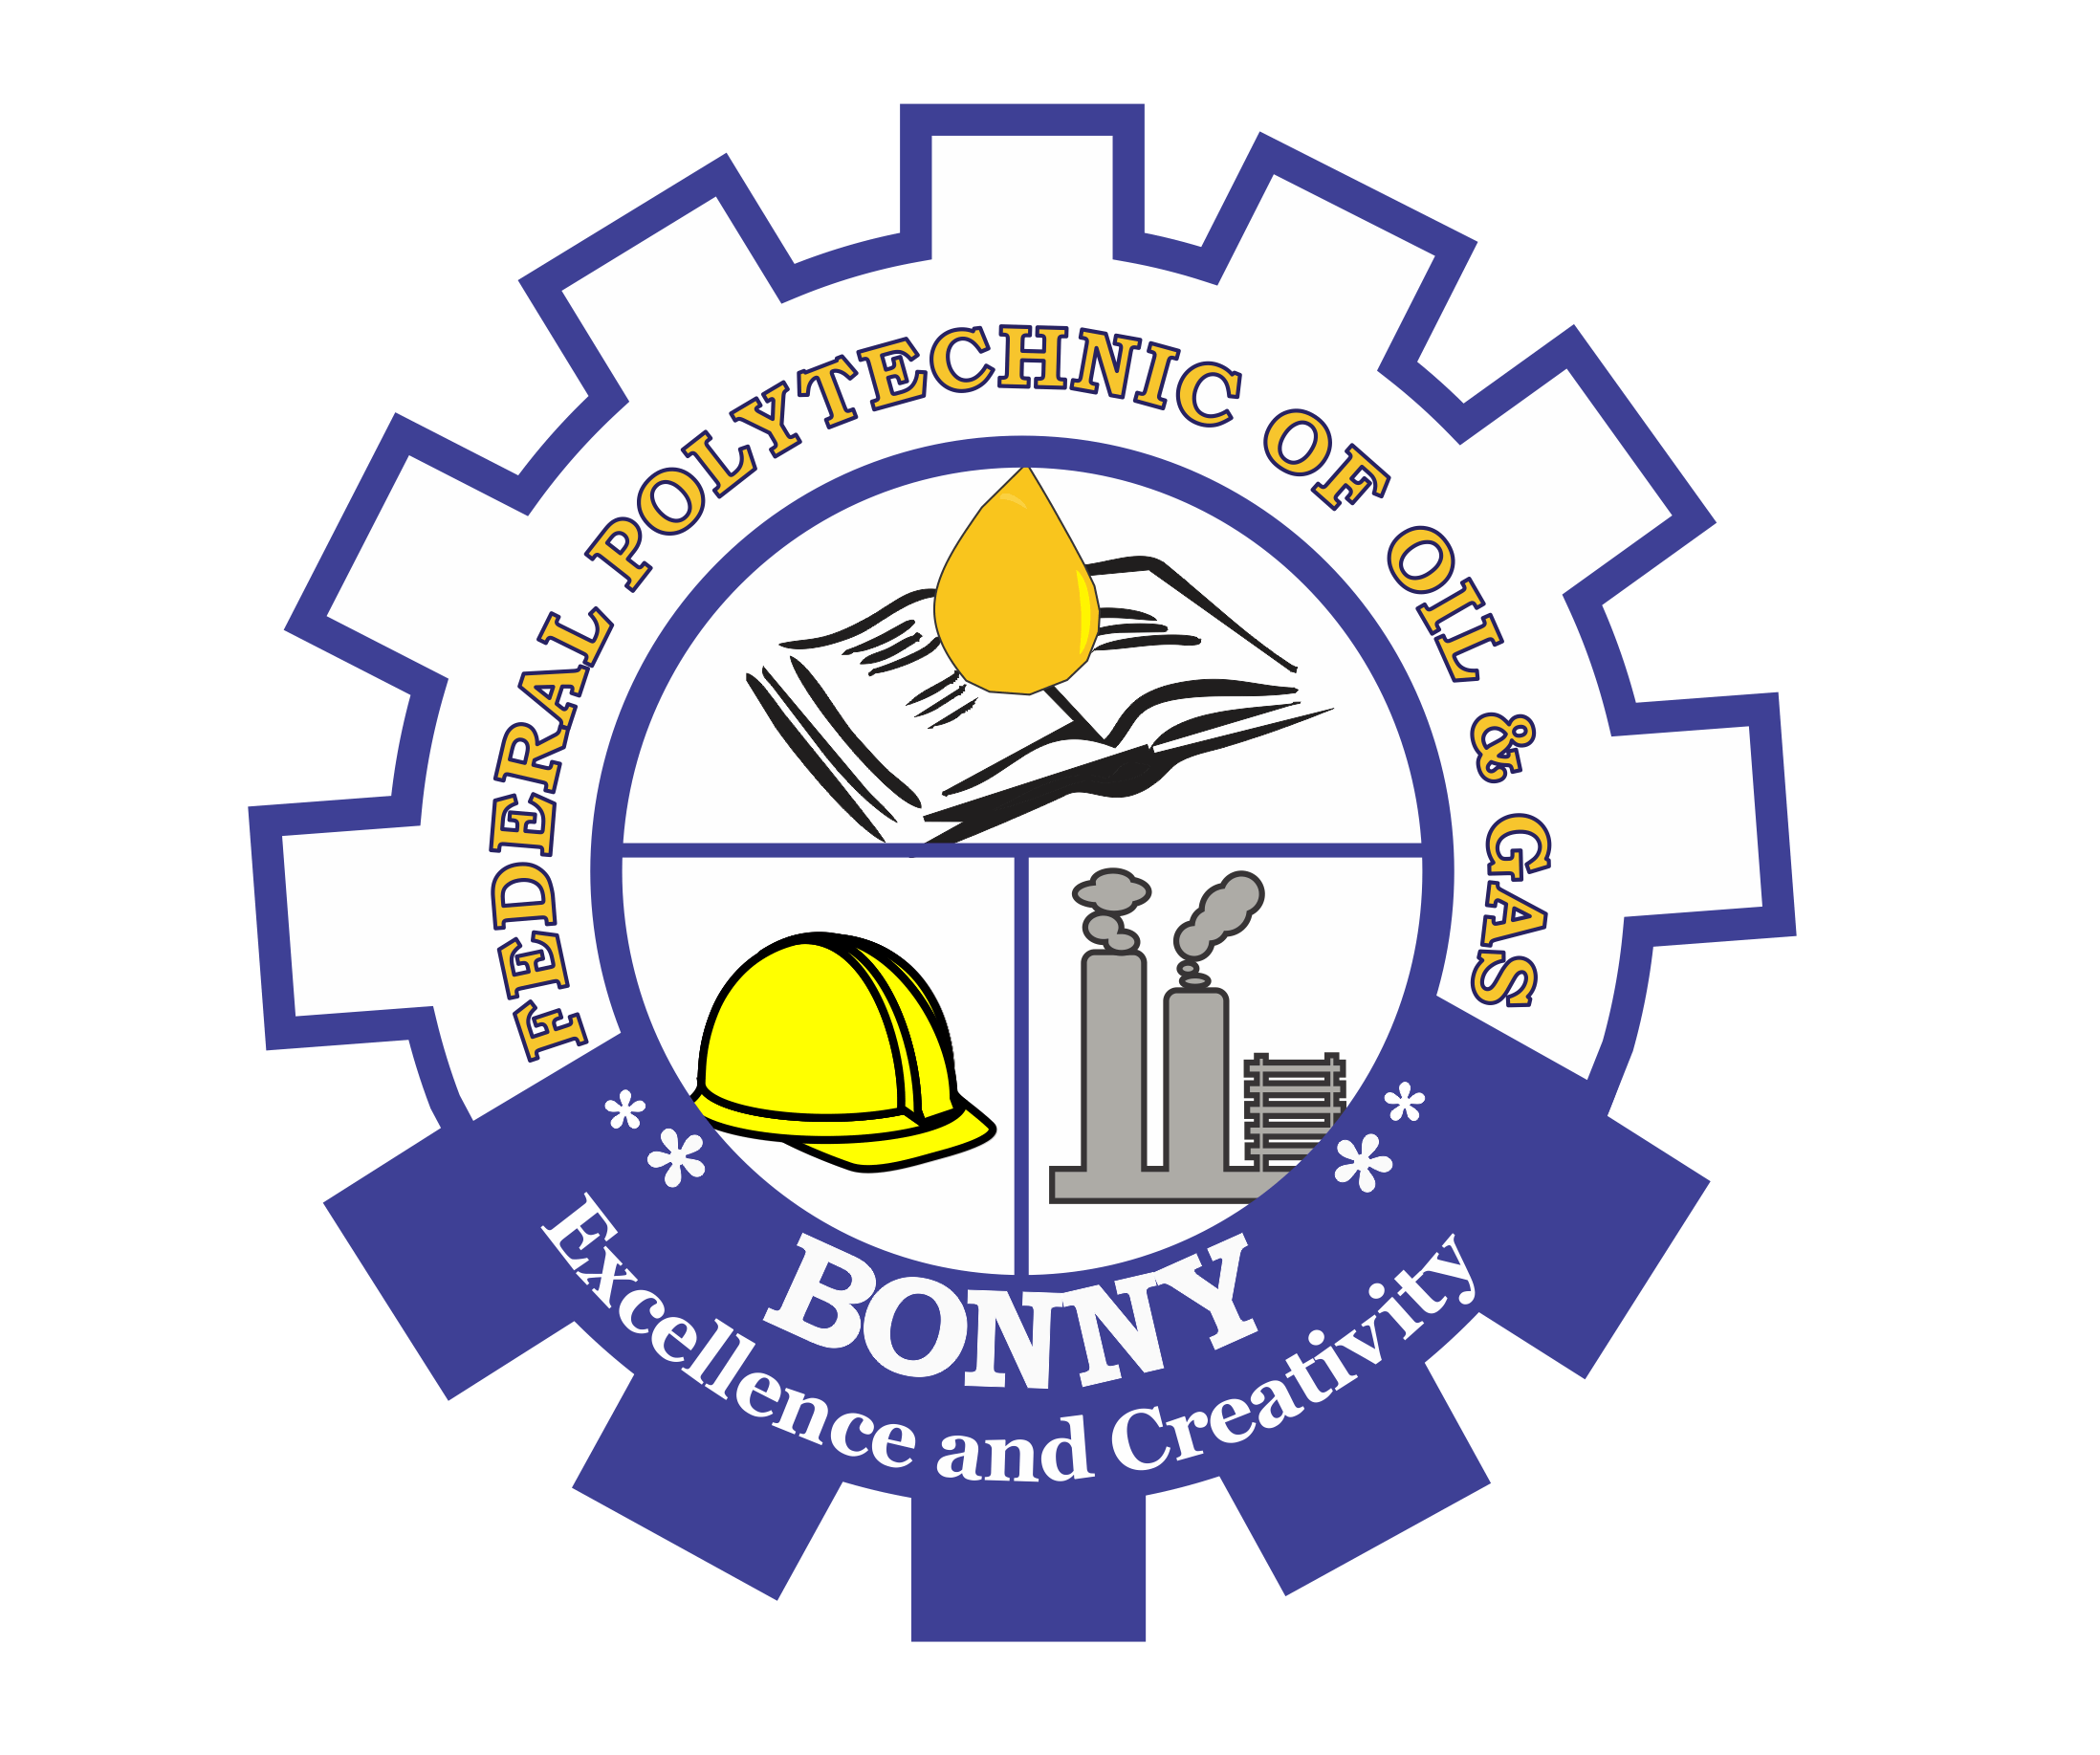 Fedpoly Bonny admission for remedial students